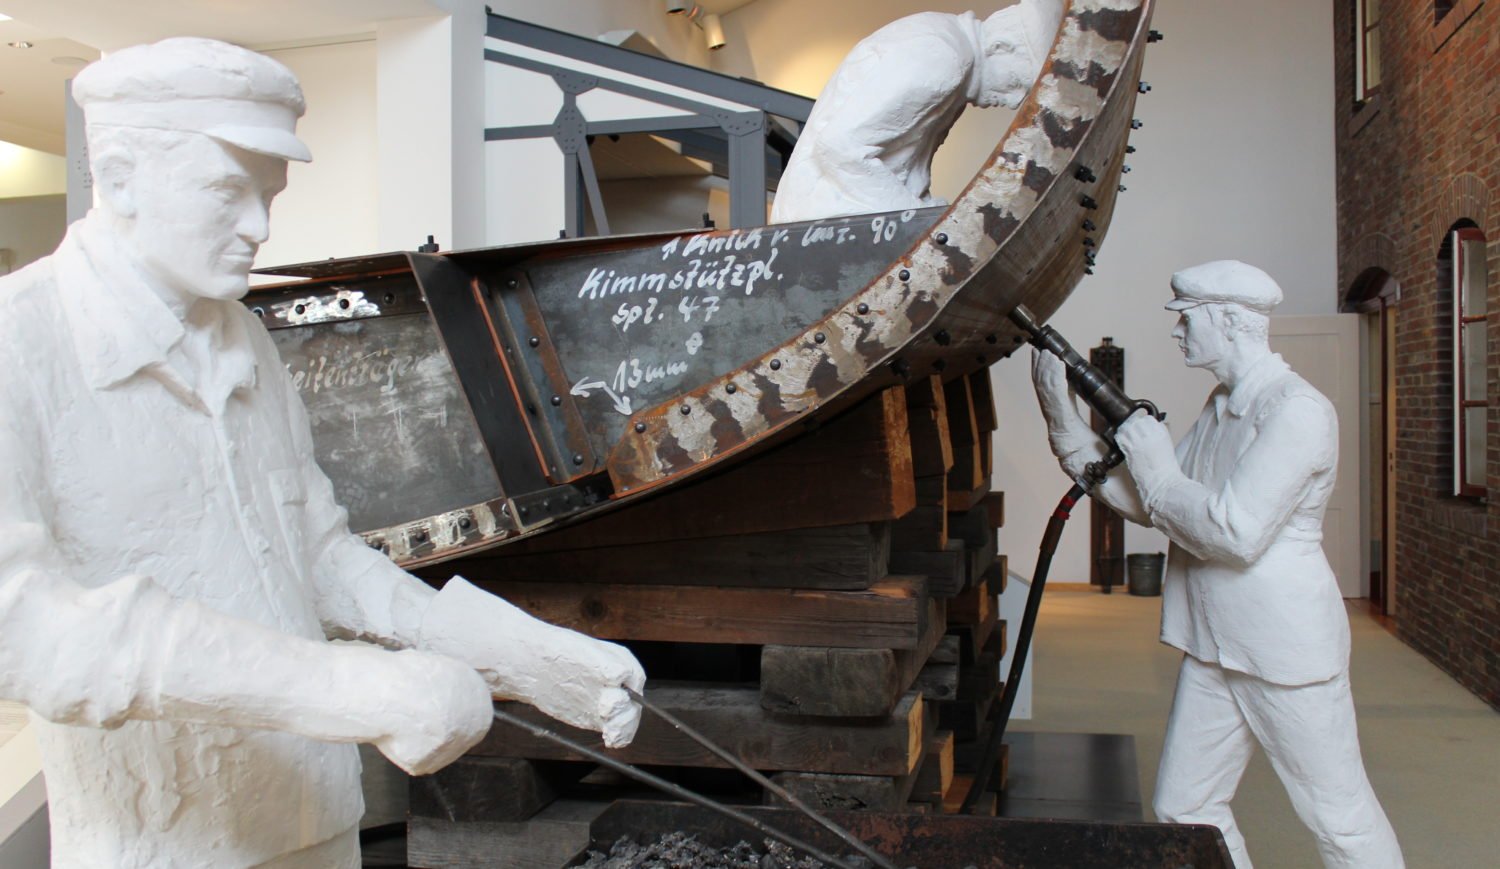 At the Historical Museum in Bremerhaven, you can learn how shipping and trade have influenced the lives of the people of Bremerhaven and the surrounding area over the centuries